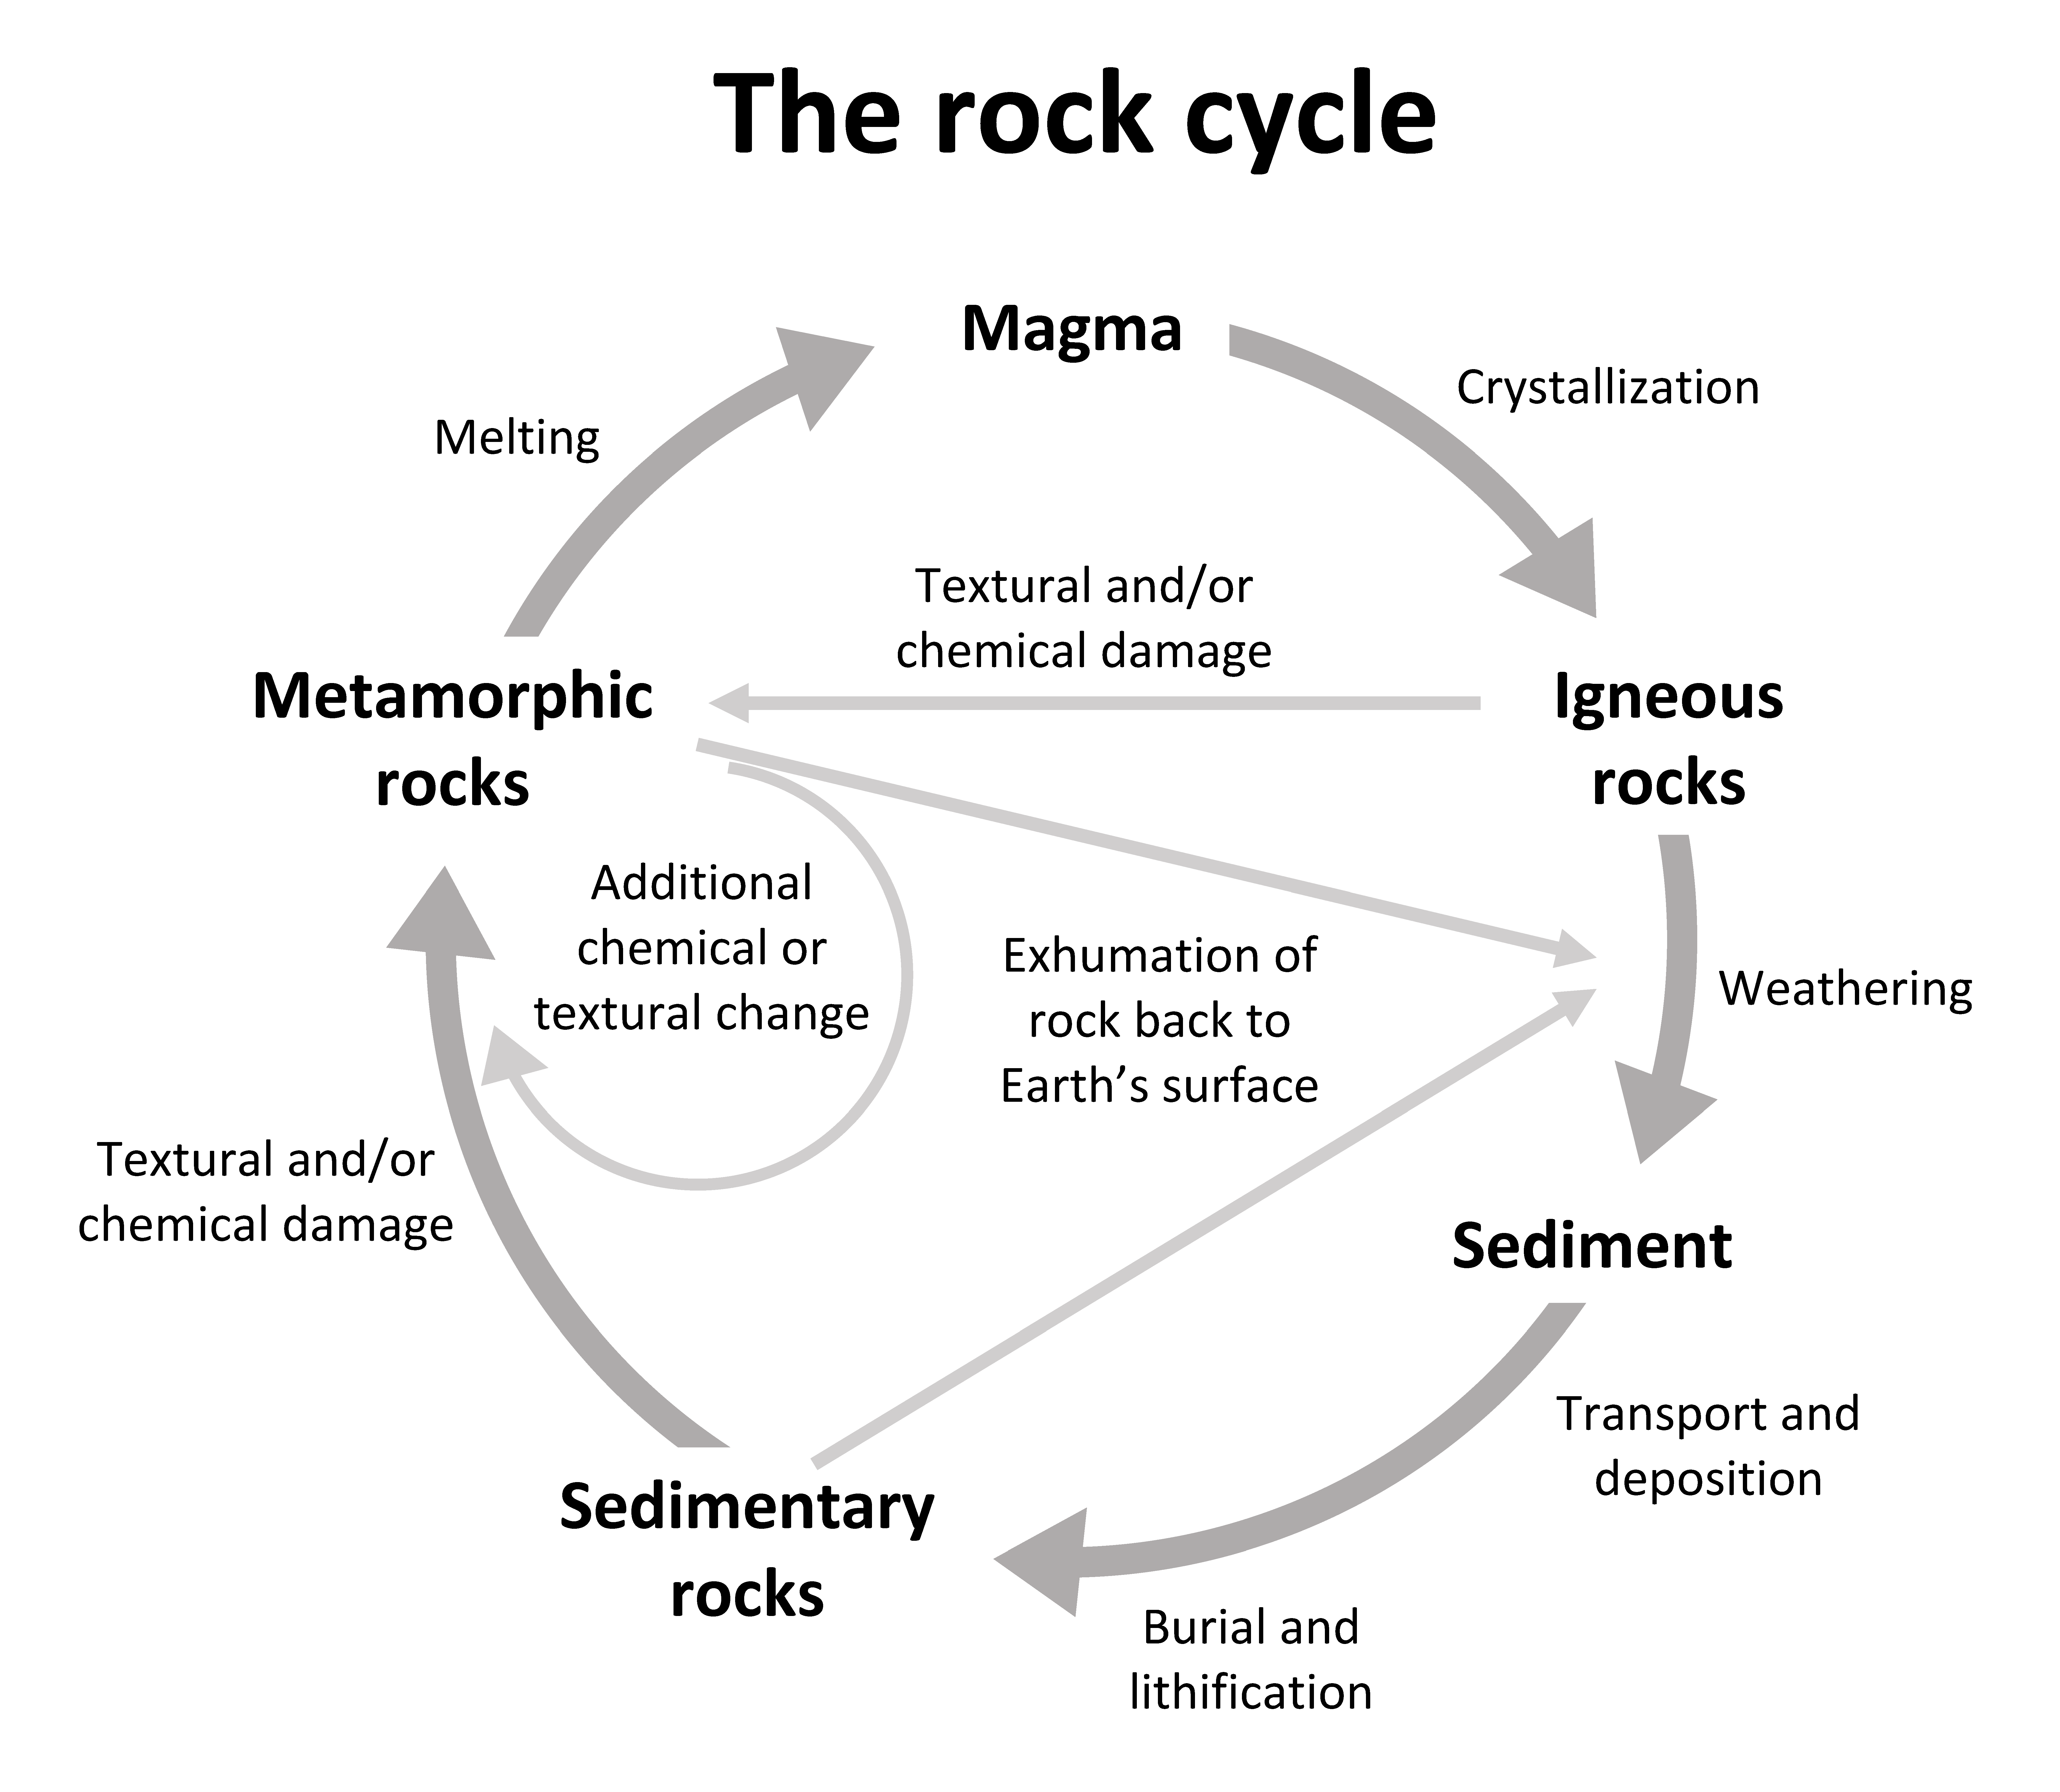 The rock cycle shows how different rock groups are interconnected. Metamorphic rocks can come from adding heat and/or pressure to other metamorphic rock or sedimentary or igneous rocks